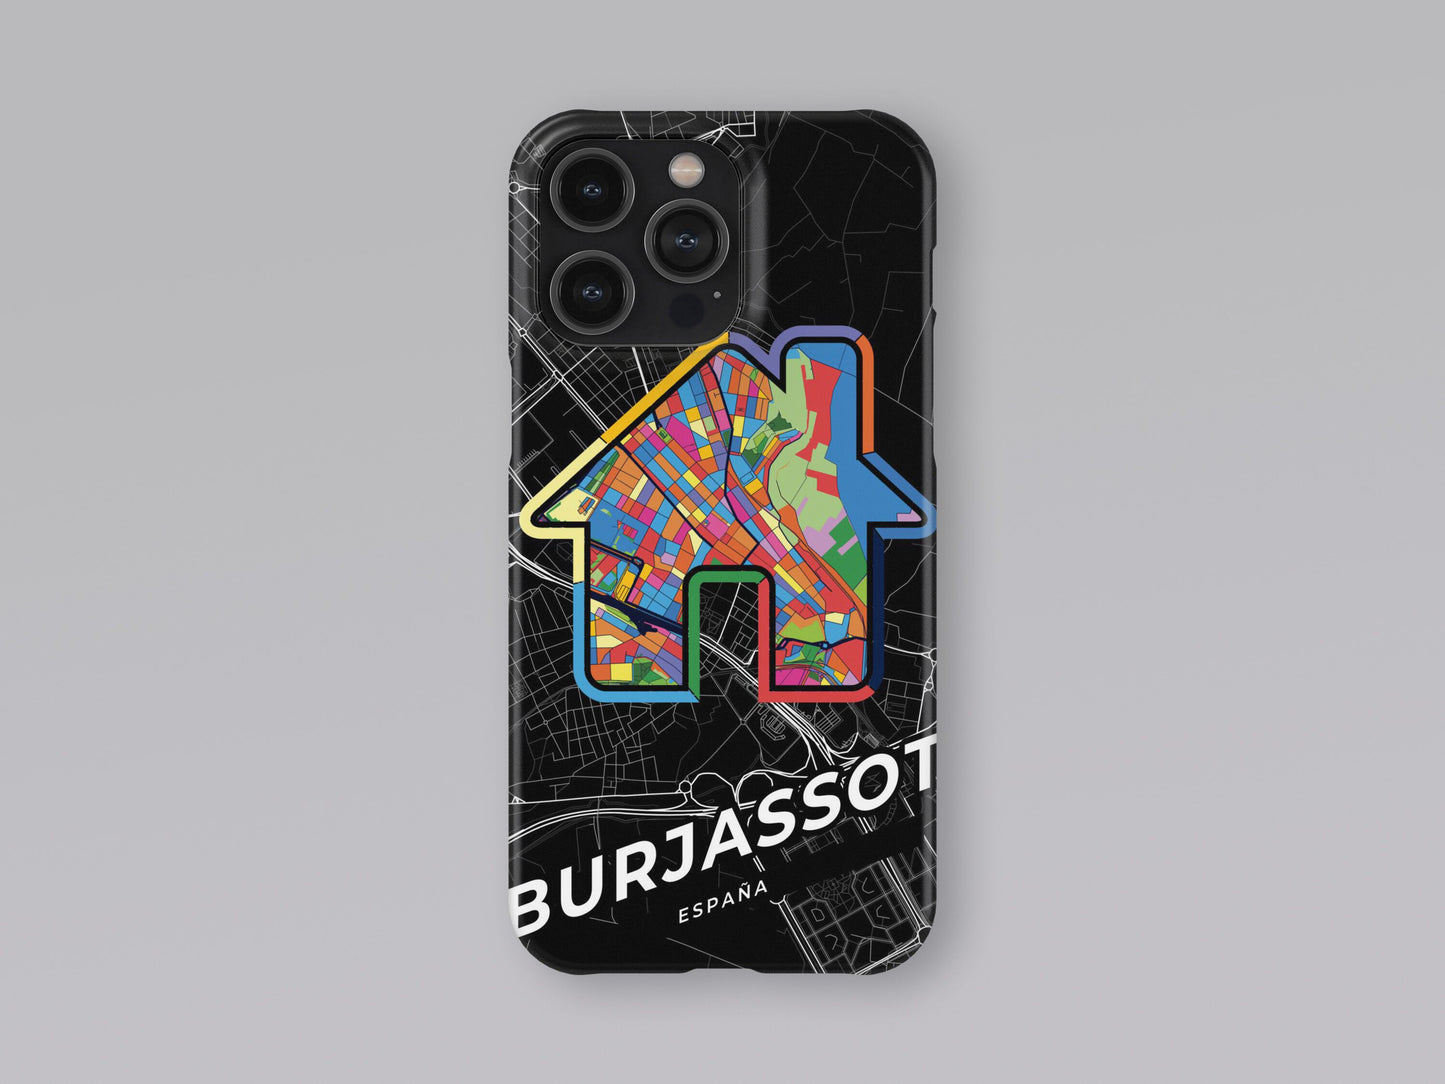 Burjassot Spain slim phone case with colorful icon. Birthday, wedding or housewarming gift. Couple match cases. 3